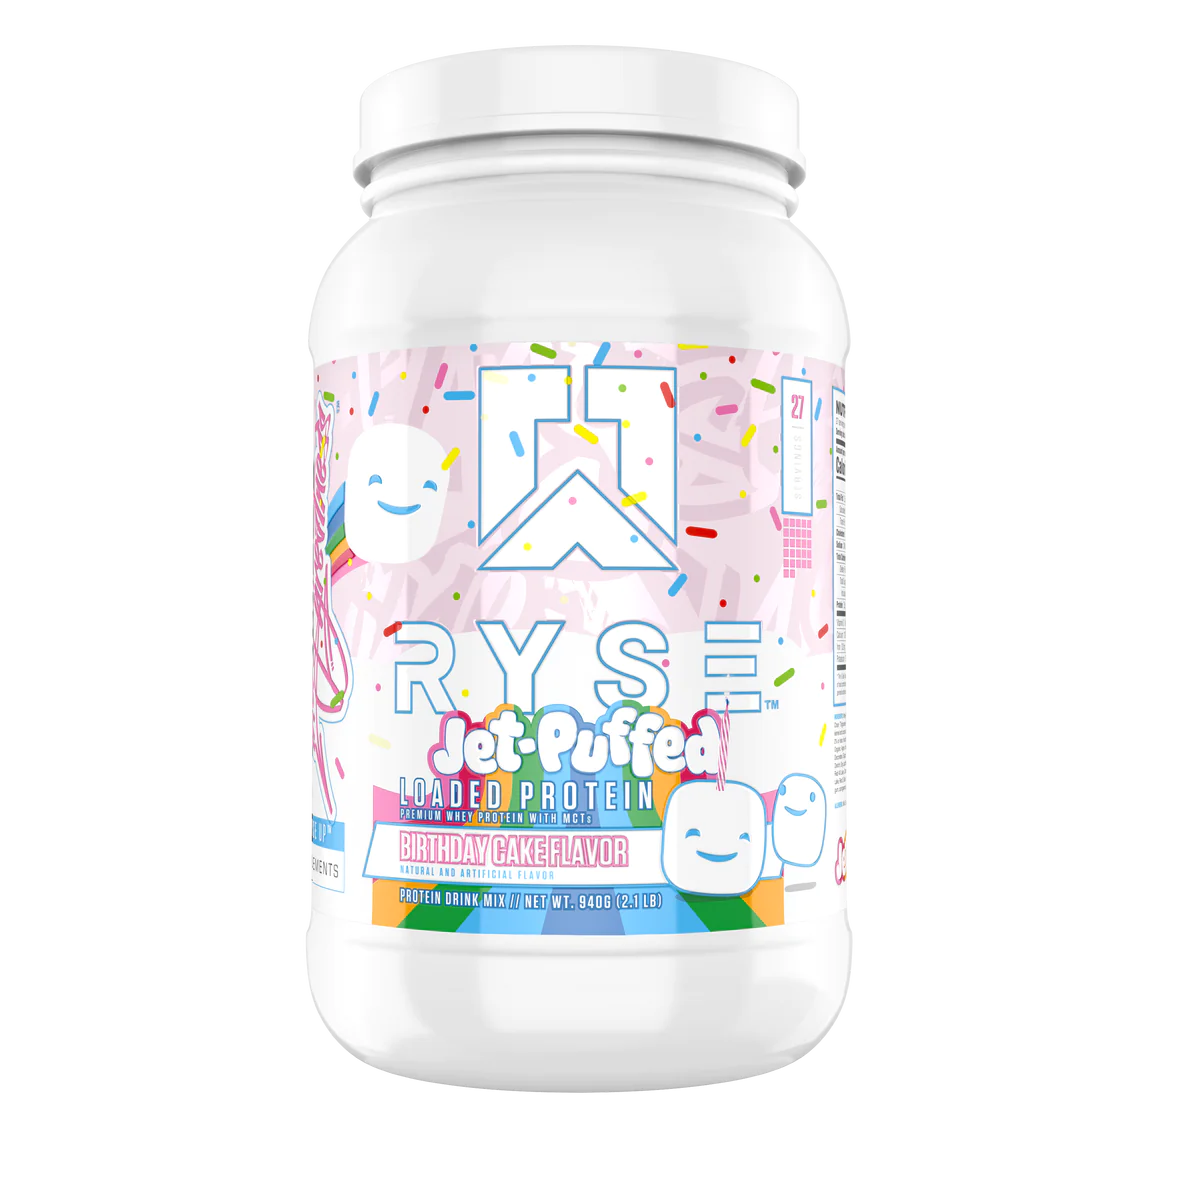 Ryse Jet Puffed Birthday Cake Loaded Protein 27 Servings